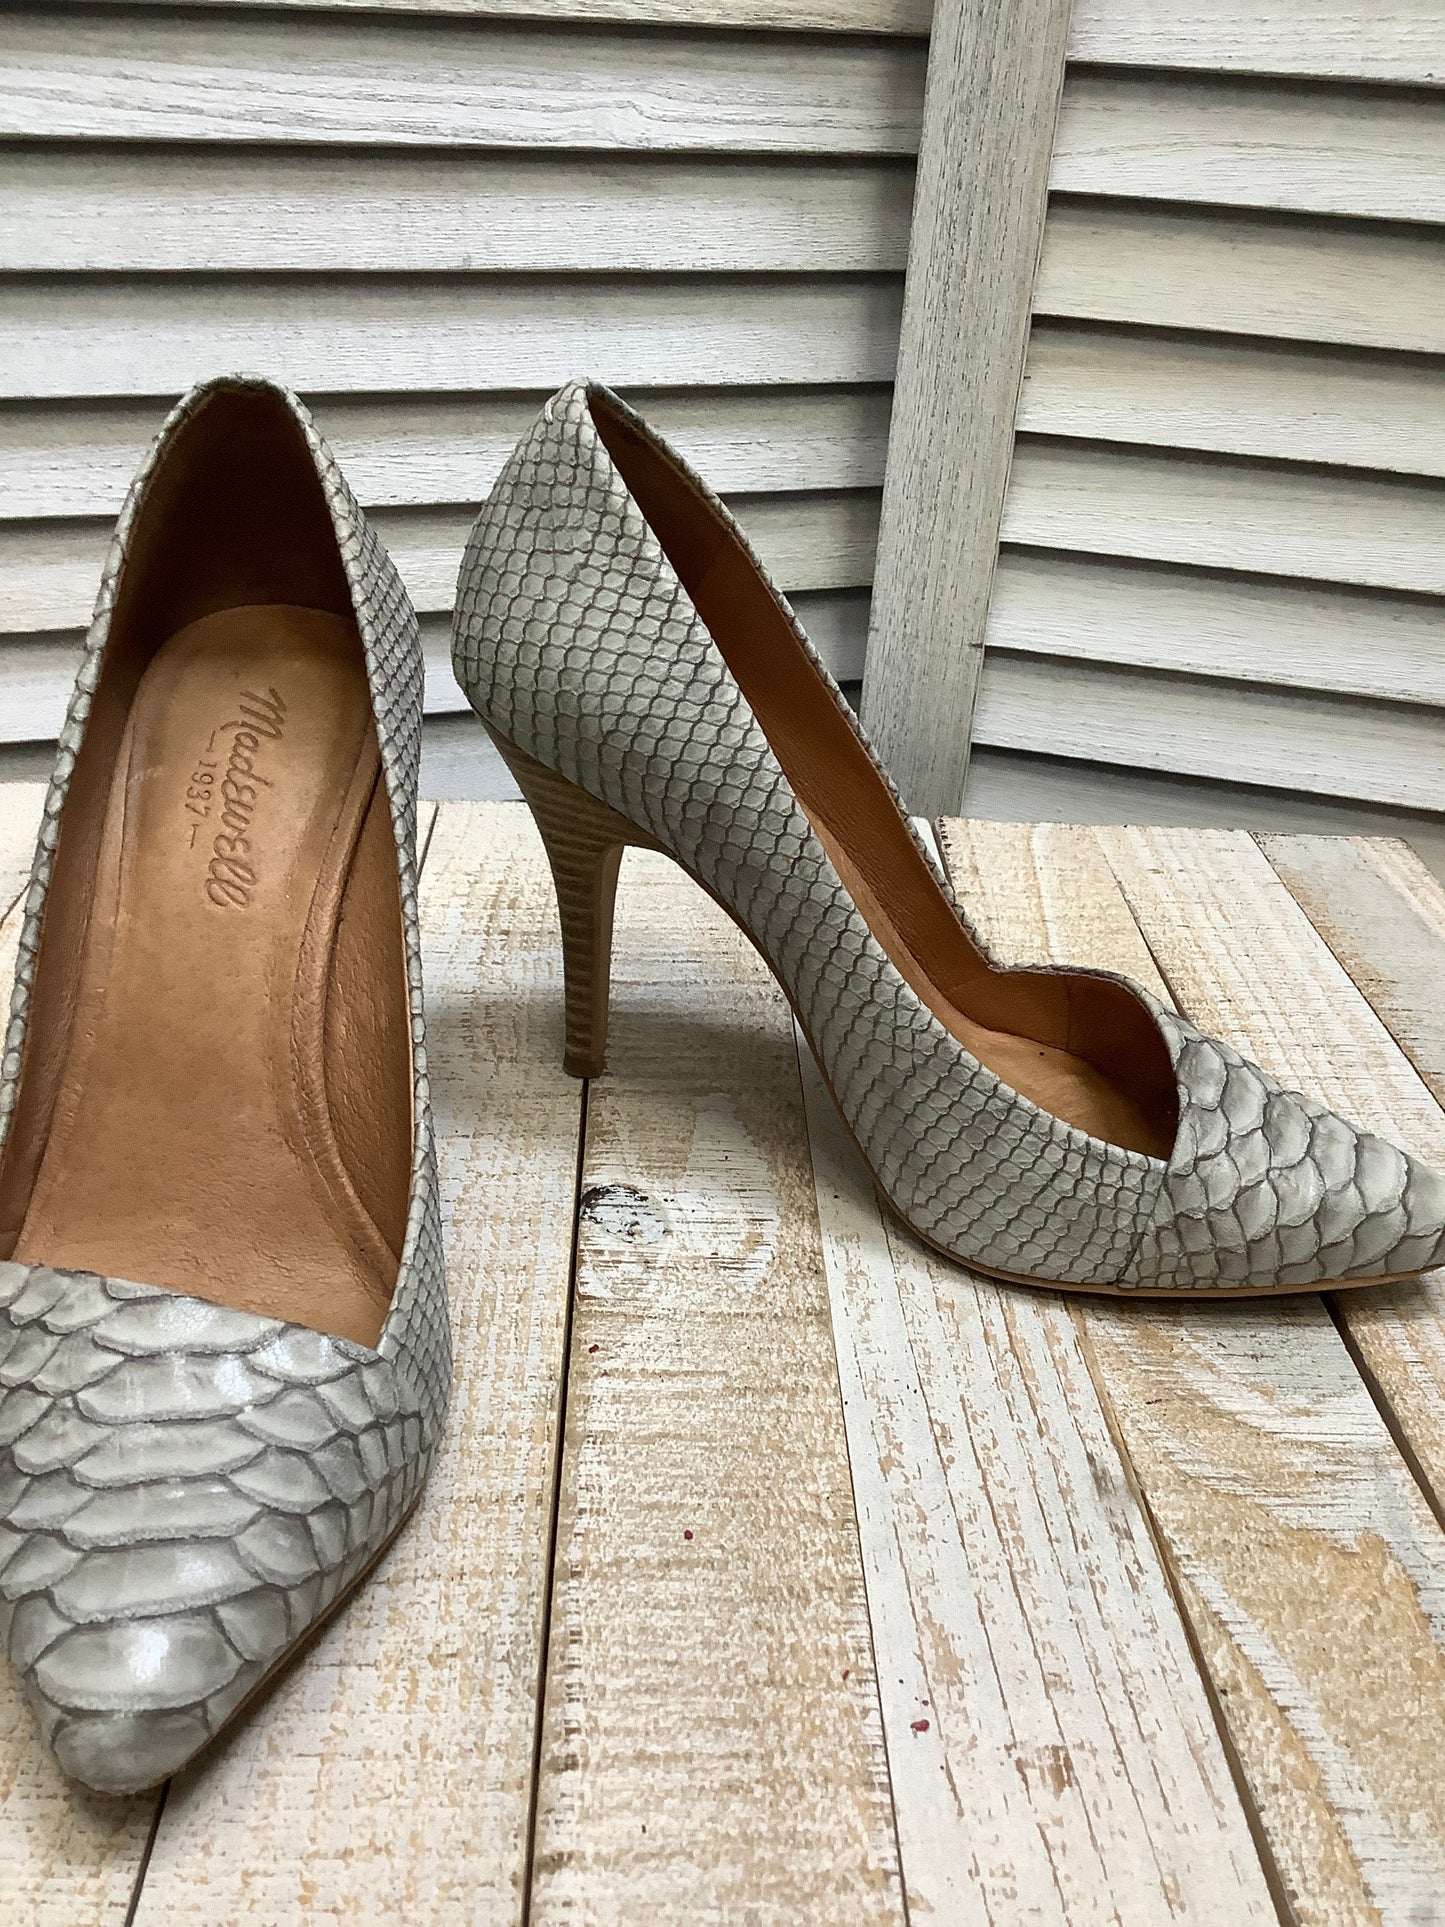 Snakeskin Print Shoes Heels Stiletto Madewell, Size 6.5